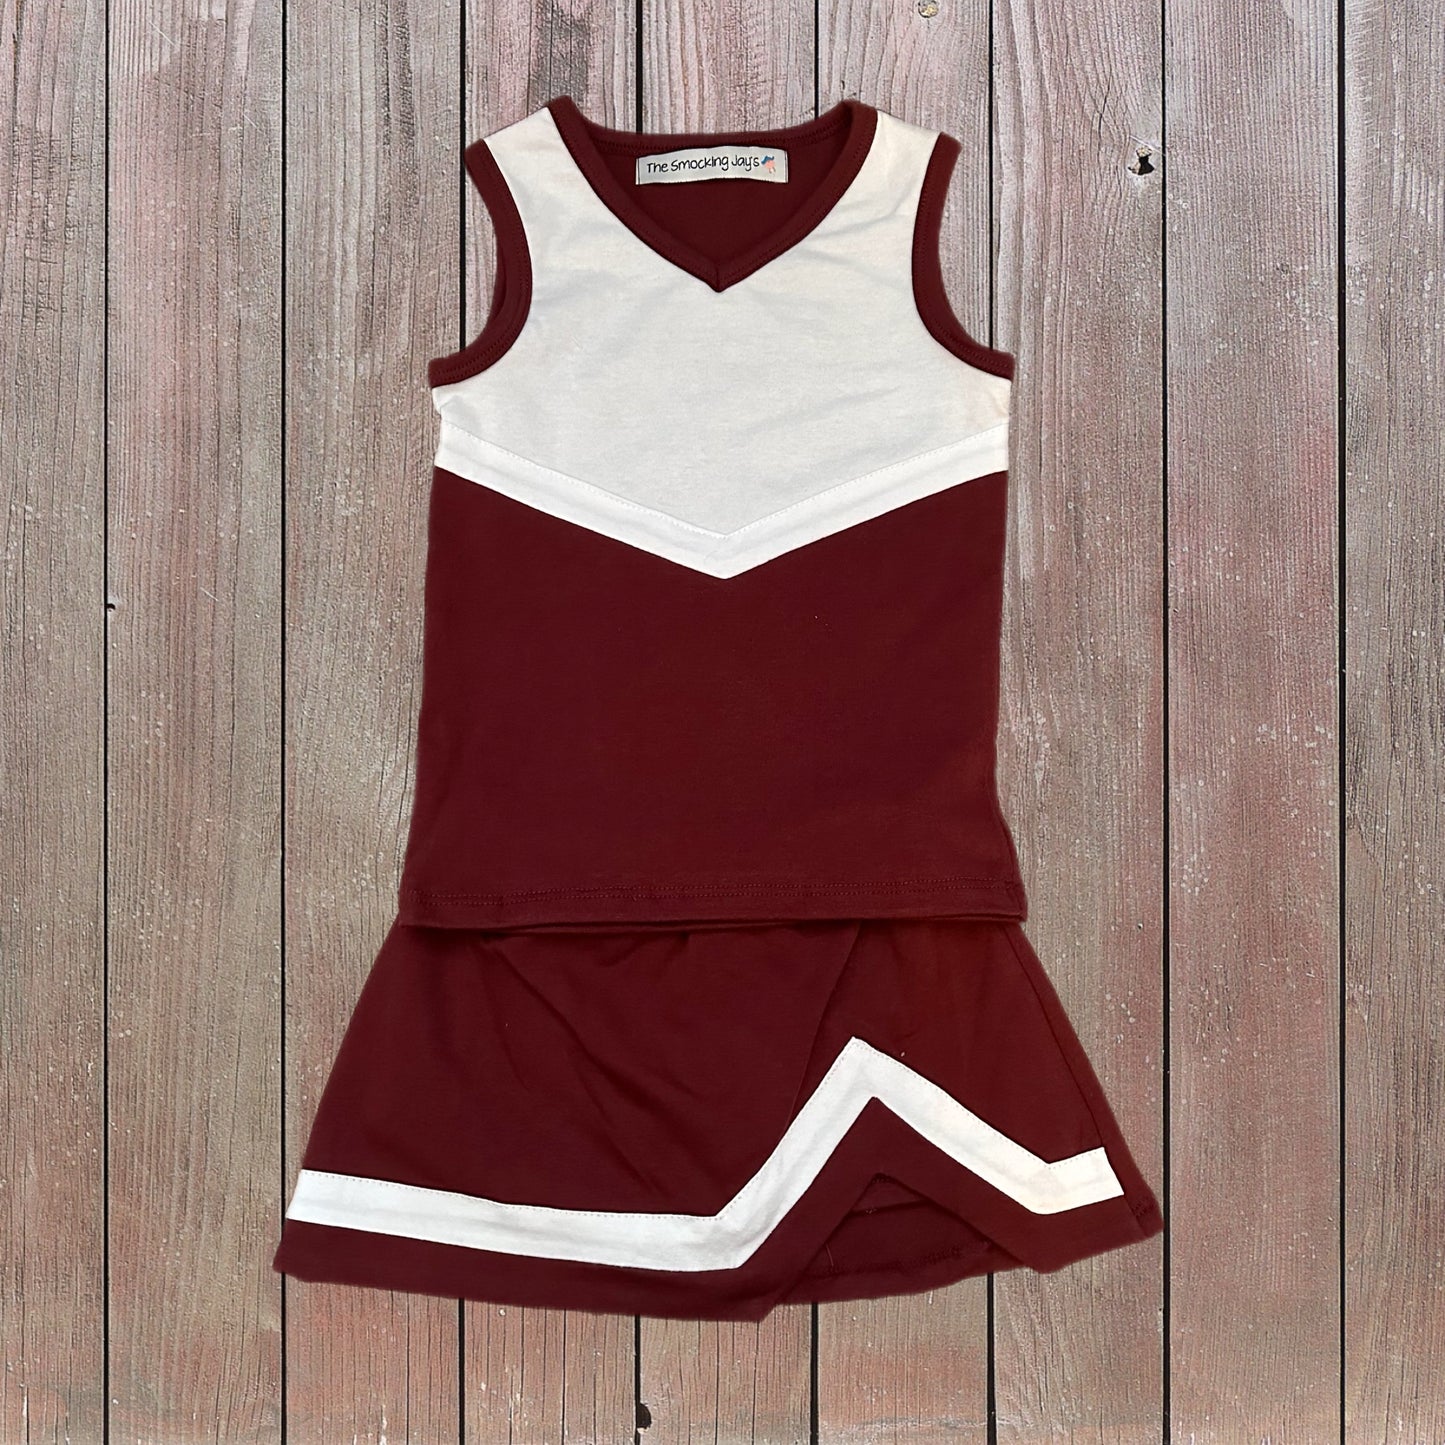 Cheer Outfits Collection Maroon And White (RTS)